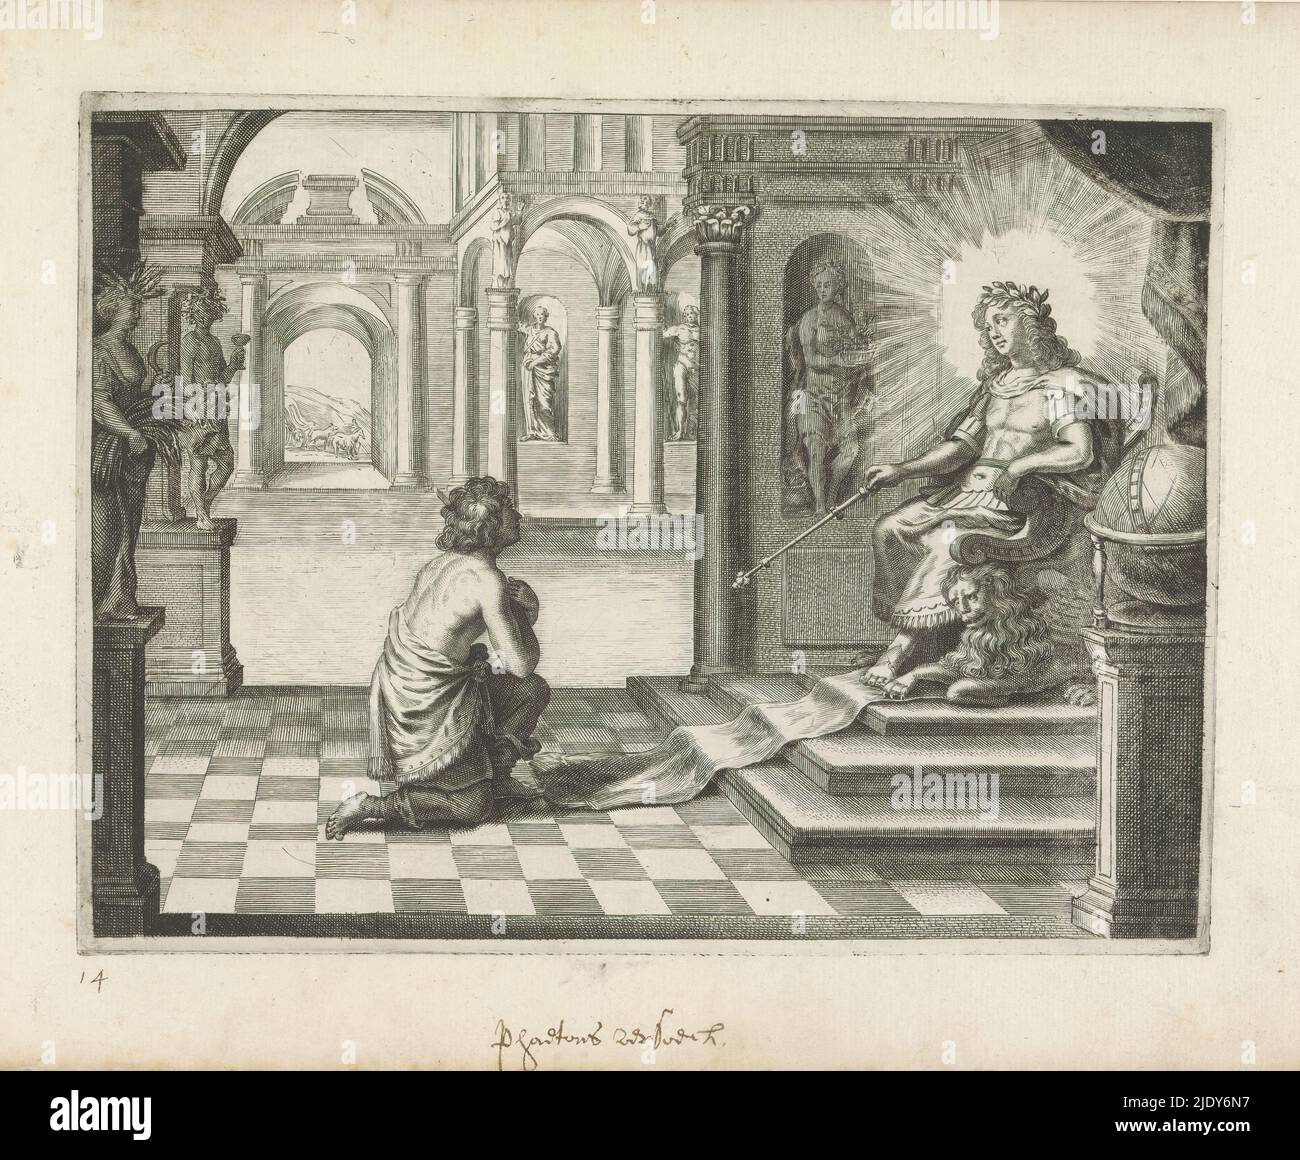 Phaëthon asks his father if he may ride in his solar chariot, Metamorphoses of Ovid (series title), Phaëthon kneels in front of his throne in the palace of his father, the sun god, asking if he may ride in his solar chariot. In the background is the sun chariot., print maker: Crispijn van de Passe (II), after design by: Bartholomeus van Bassen, (possibly), publisher: Crispijn van de Passe (II), (attributed to), c. 1636 - 1670, paper, engraving, height 163 mm × width 218 mm Stock Photo